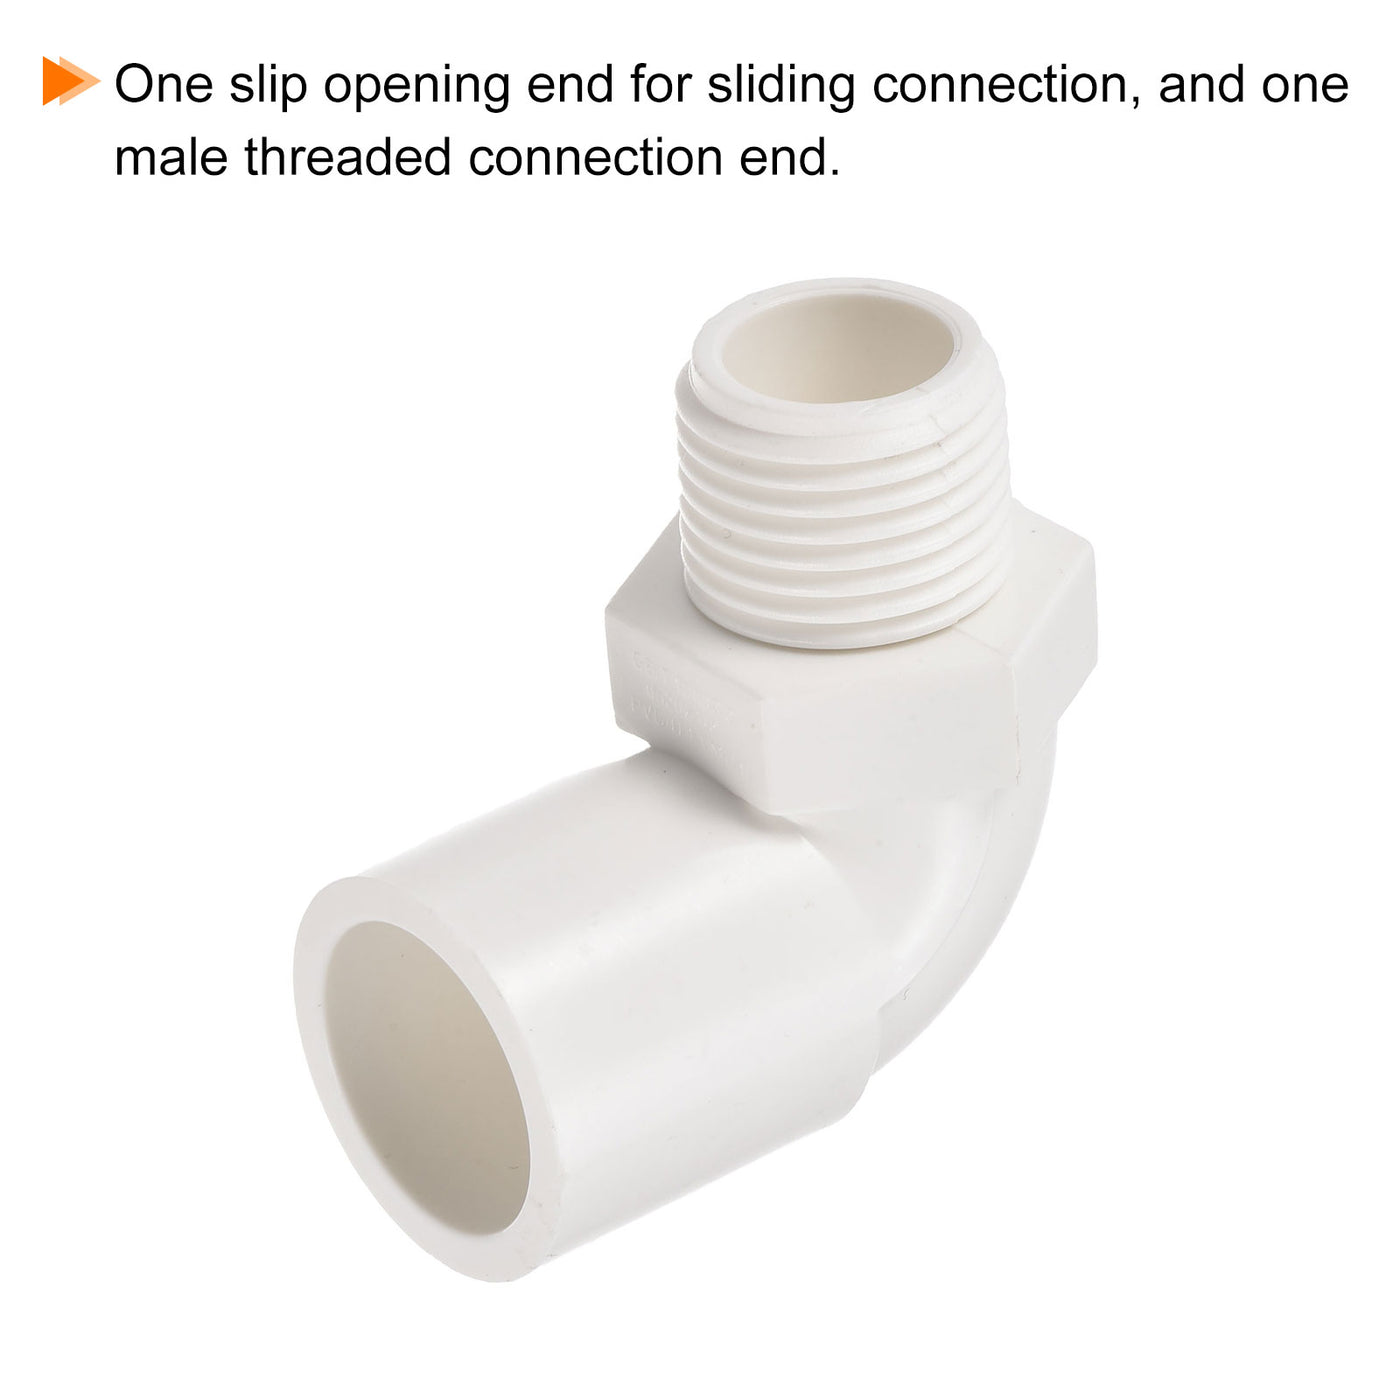 Harfington PVC Water Pipe Elbow Fitting G1/2 Male Thread 20mm ID Tube Connector Adapter, White